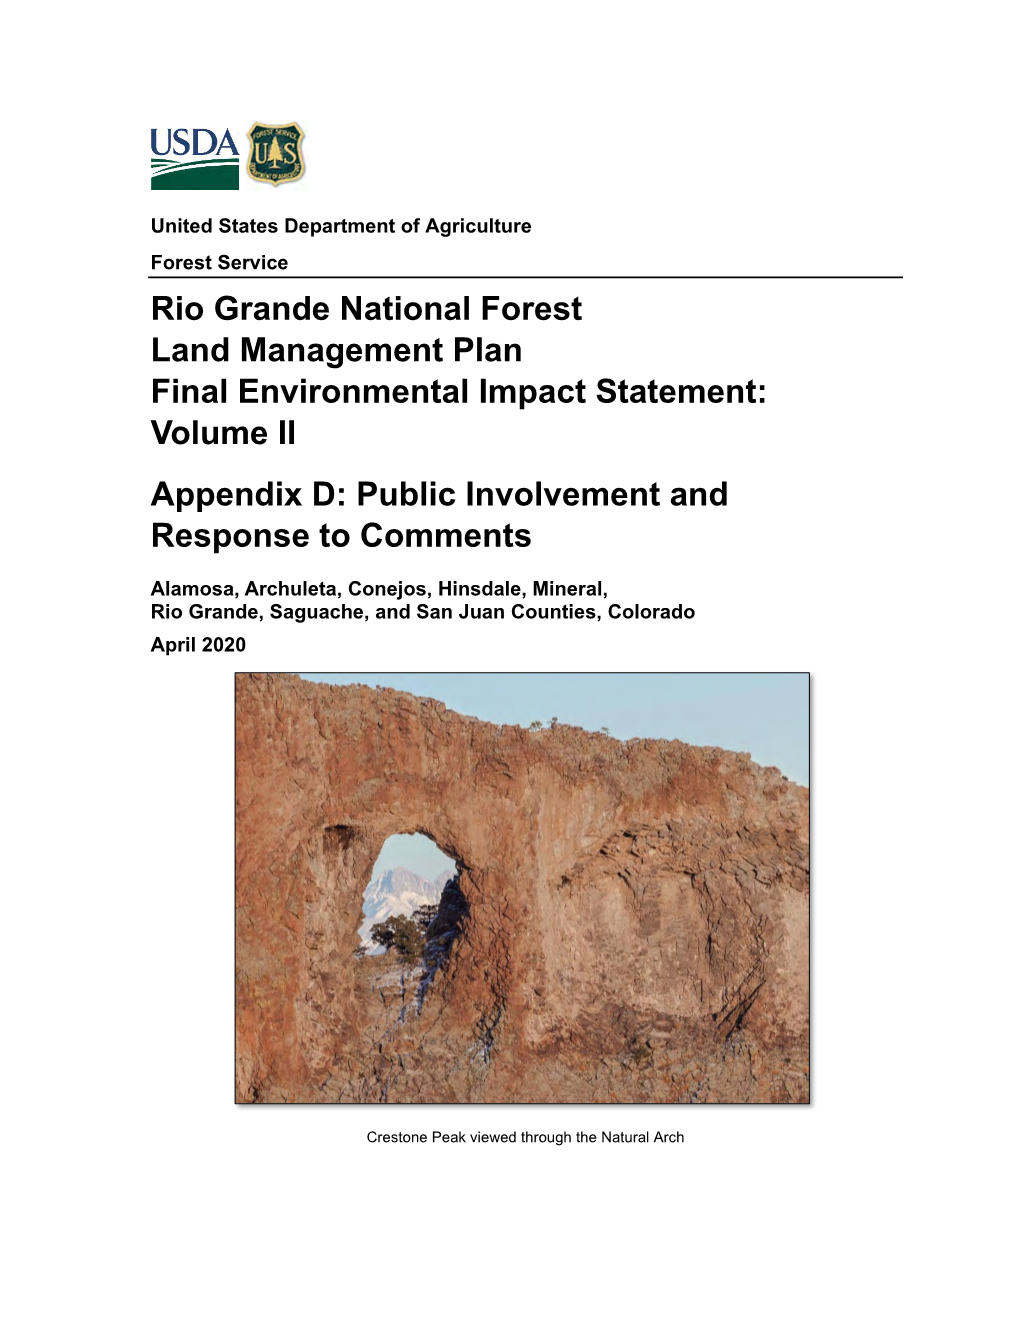 Rio Grande National Forest Land Management Plan Final Environmental Impact Statement: Volume II Appendix D: Public Involvement and Response to Comments